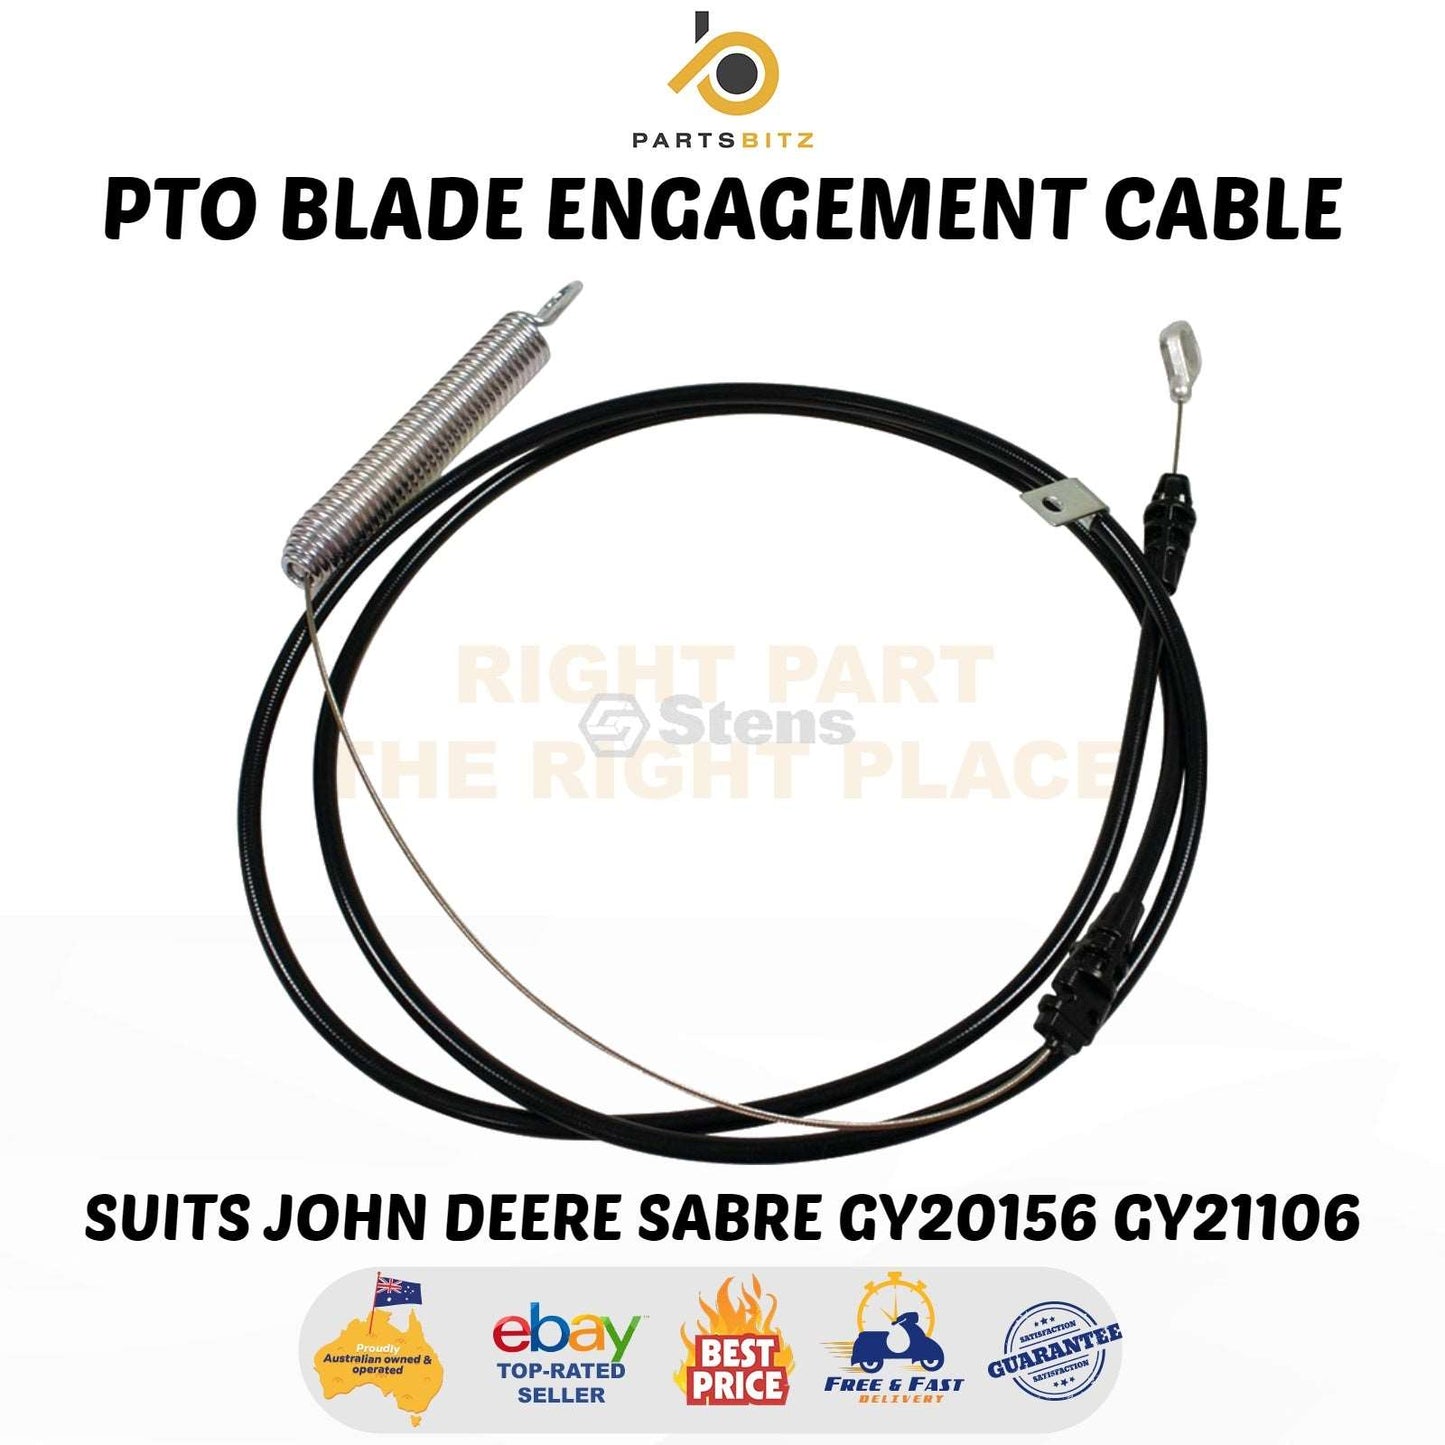 USA Made PTO Blade Engagement Cable Suits John Deere Sabre GY20156 GY21106